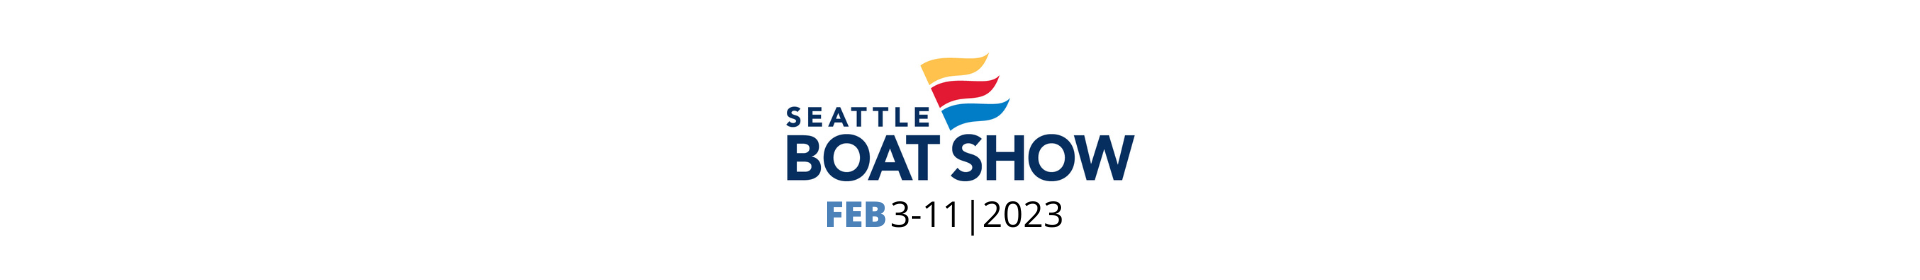 Seattle Boat Show 2023 Event Banner